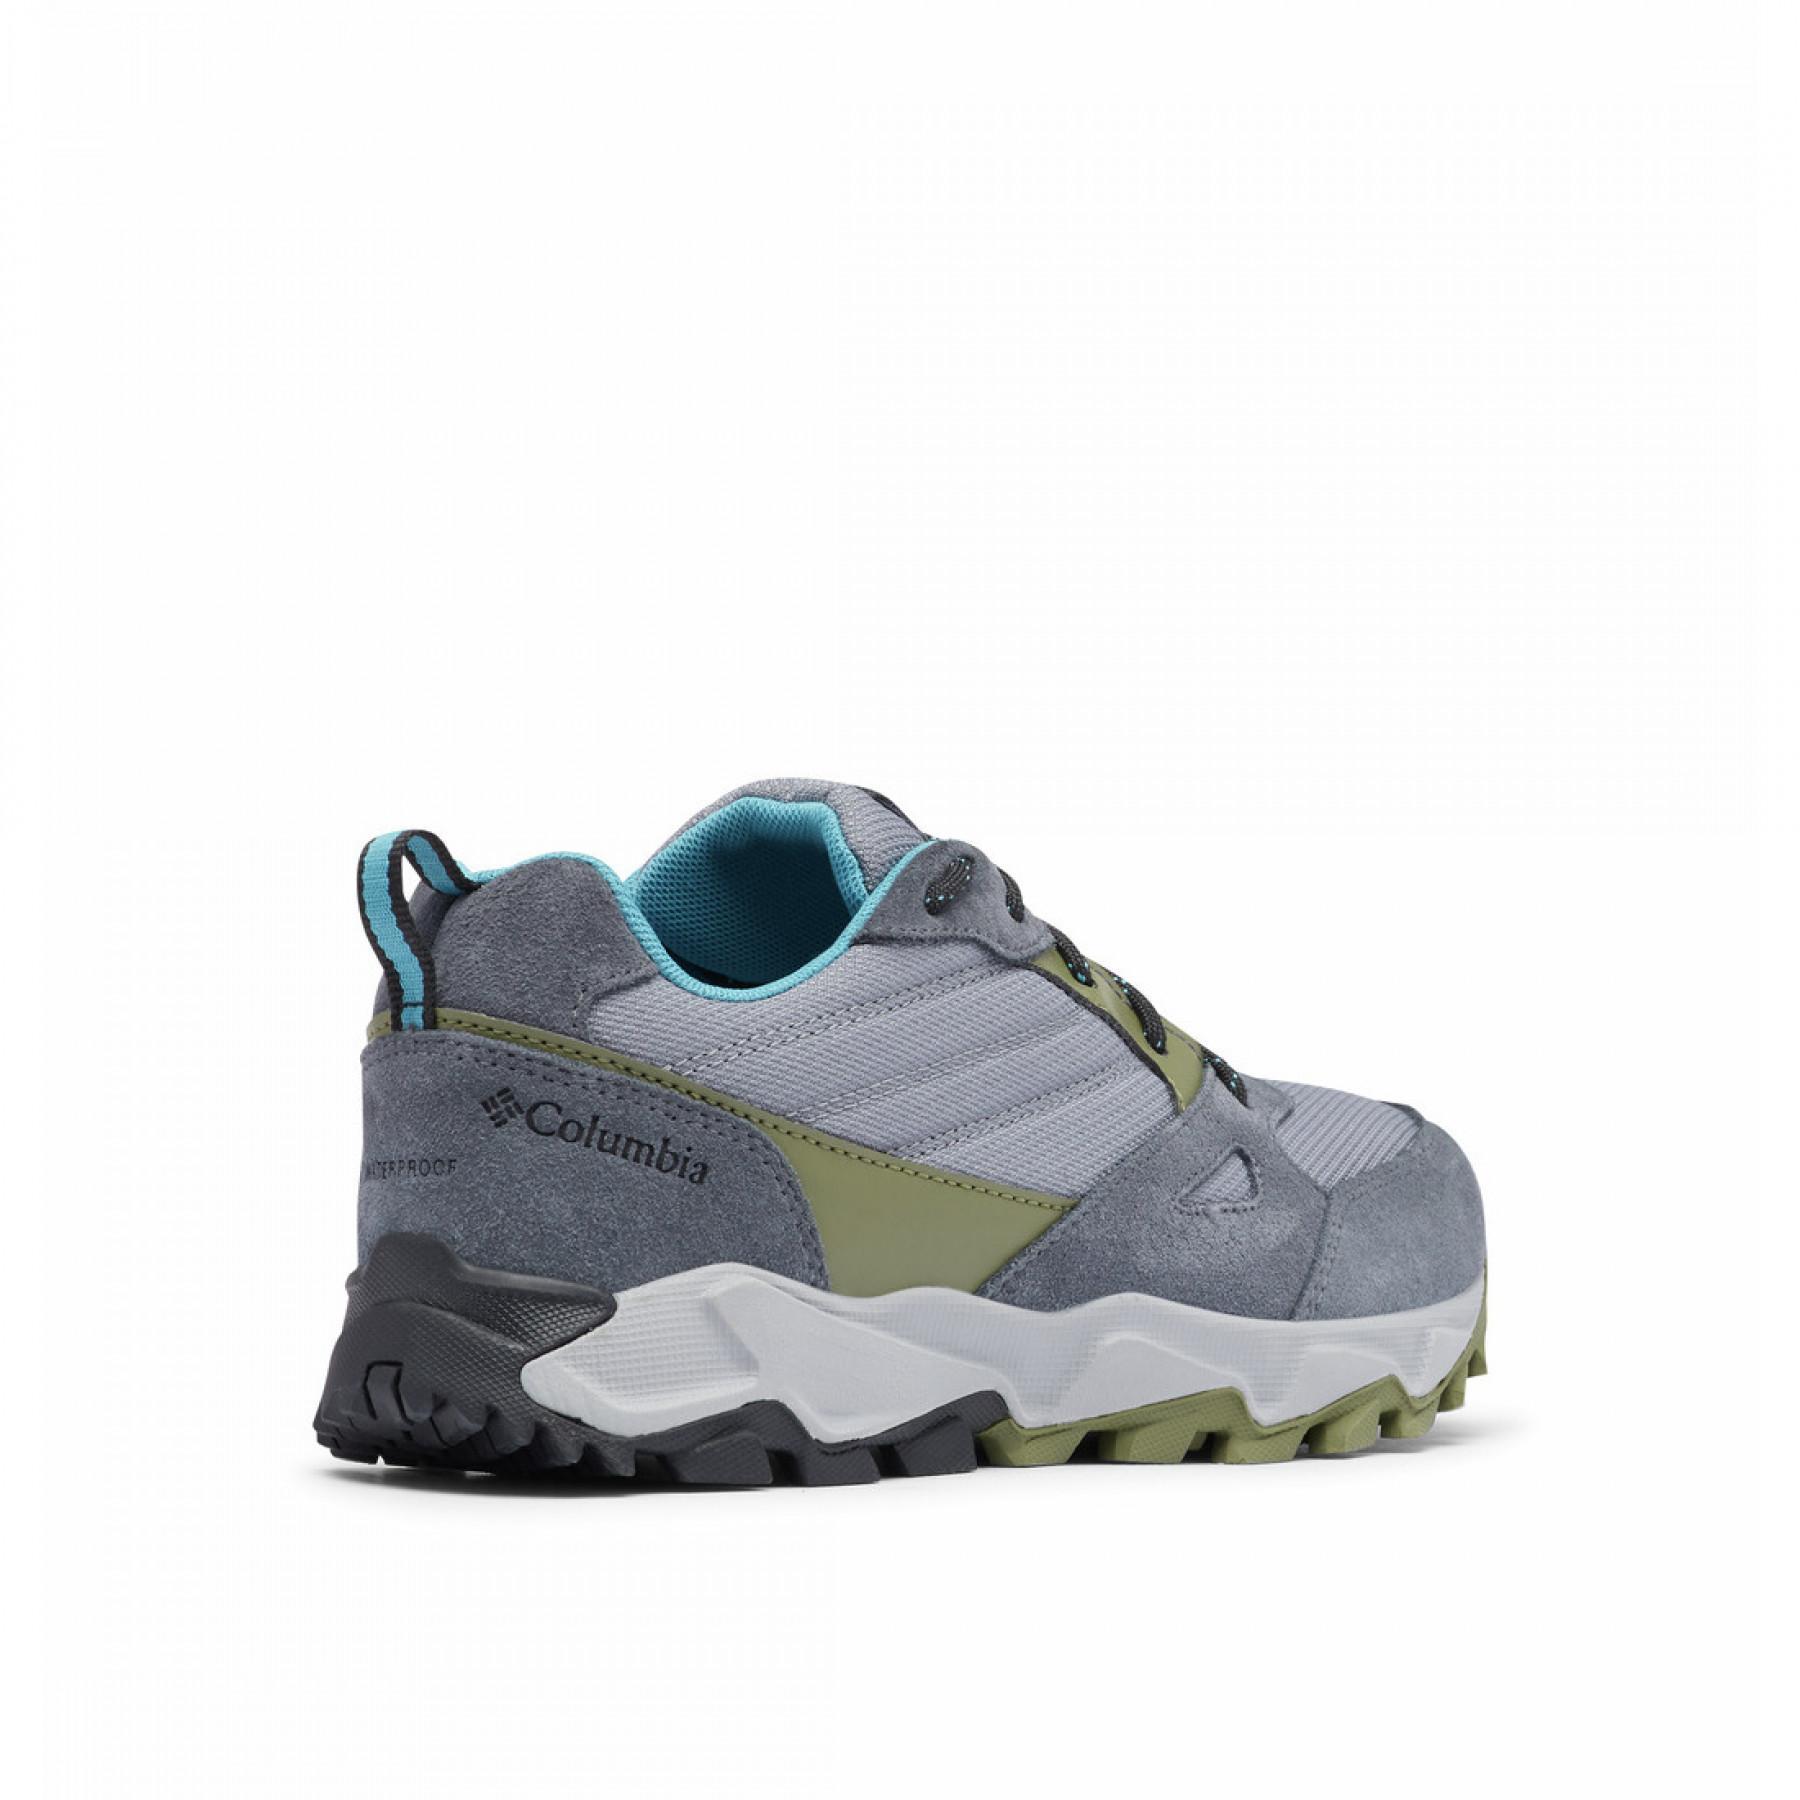 Chaussures femme Columbia Ivo Trail Wp